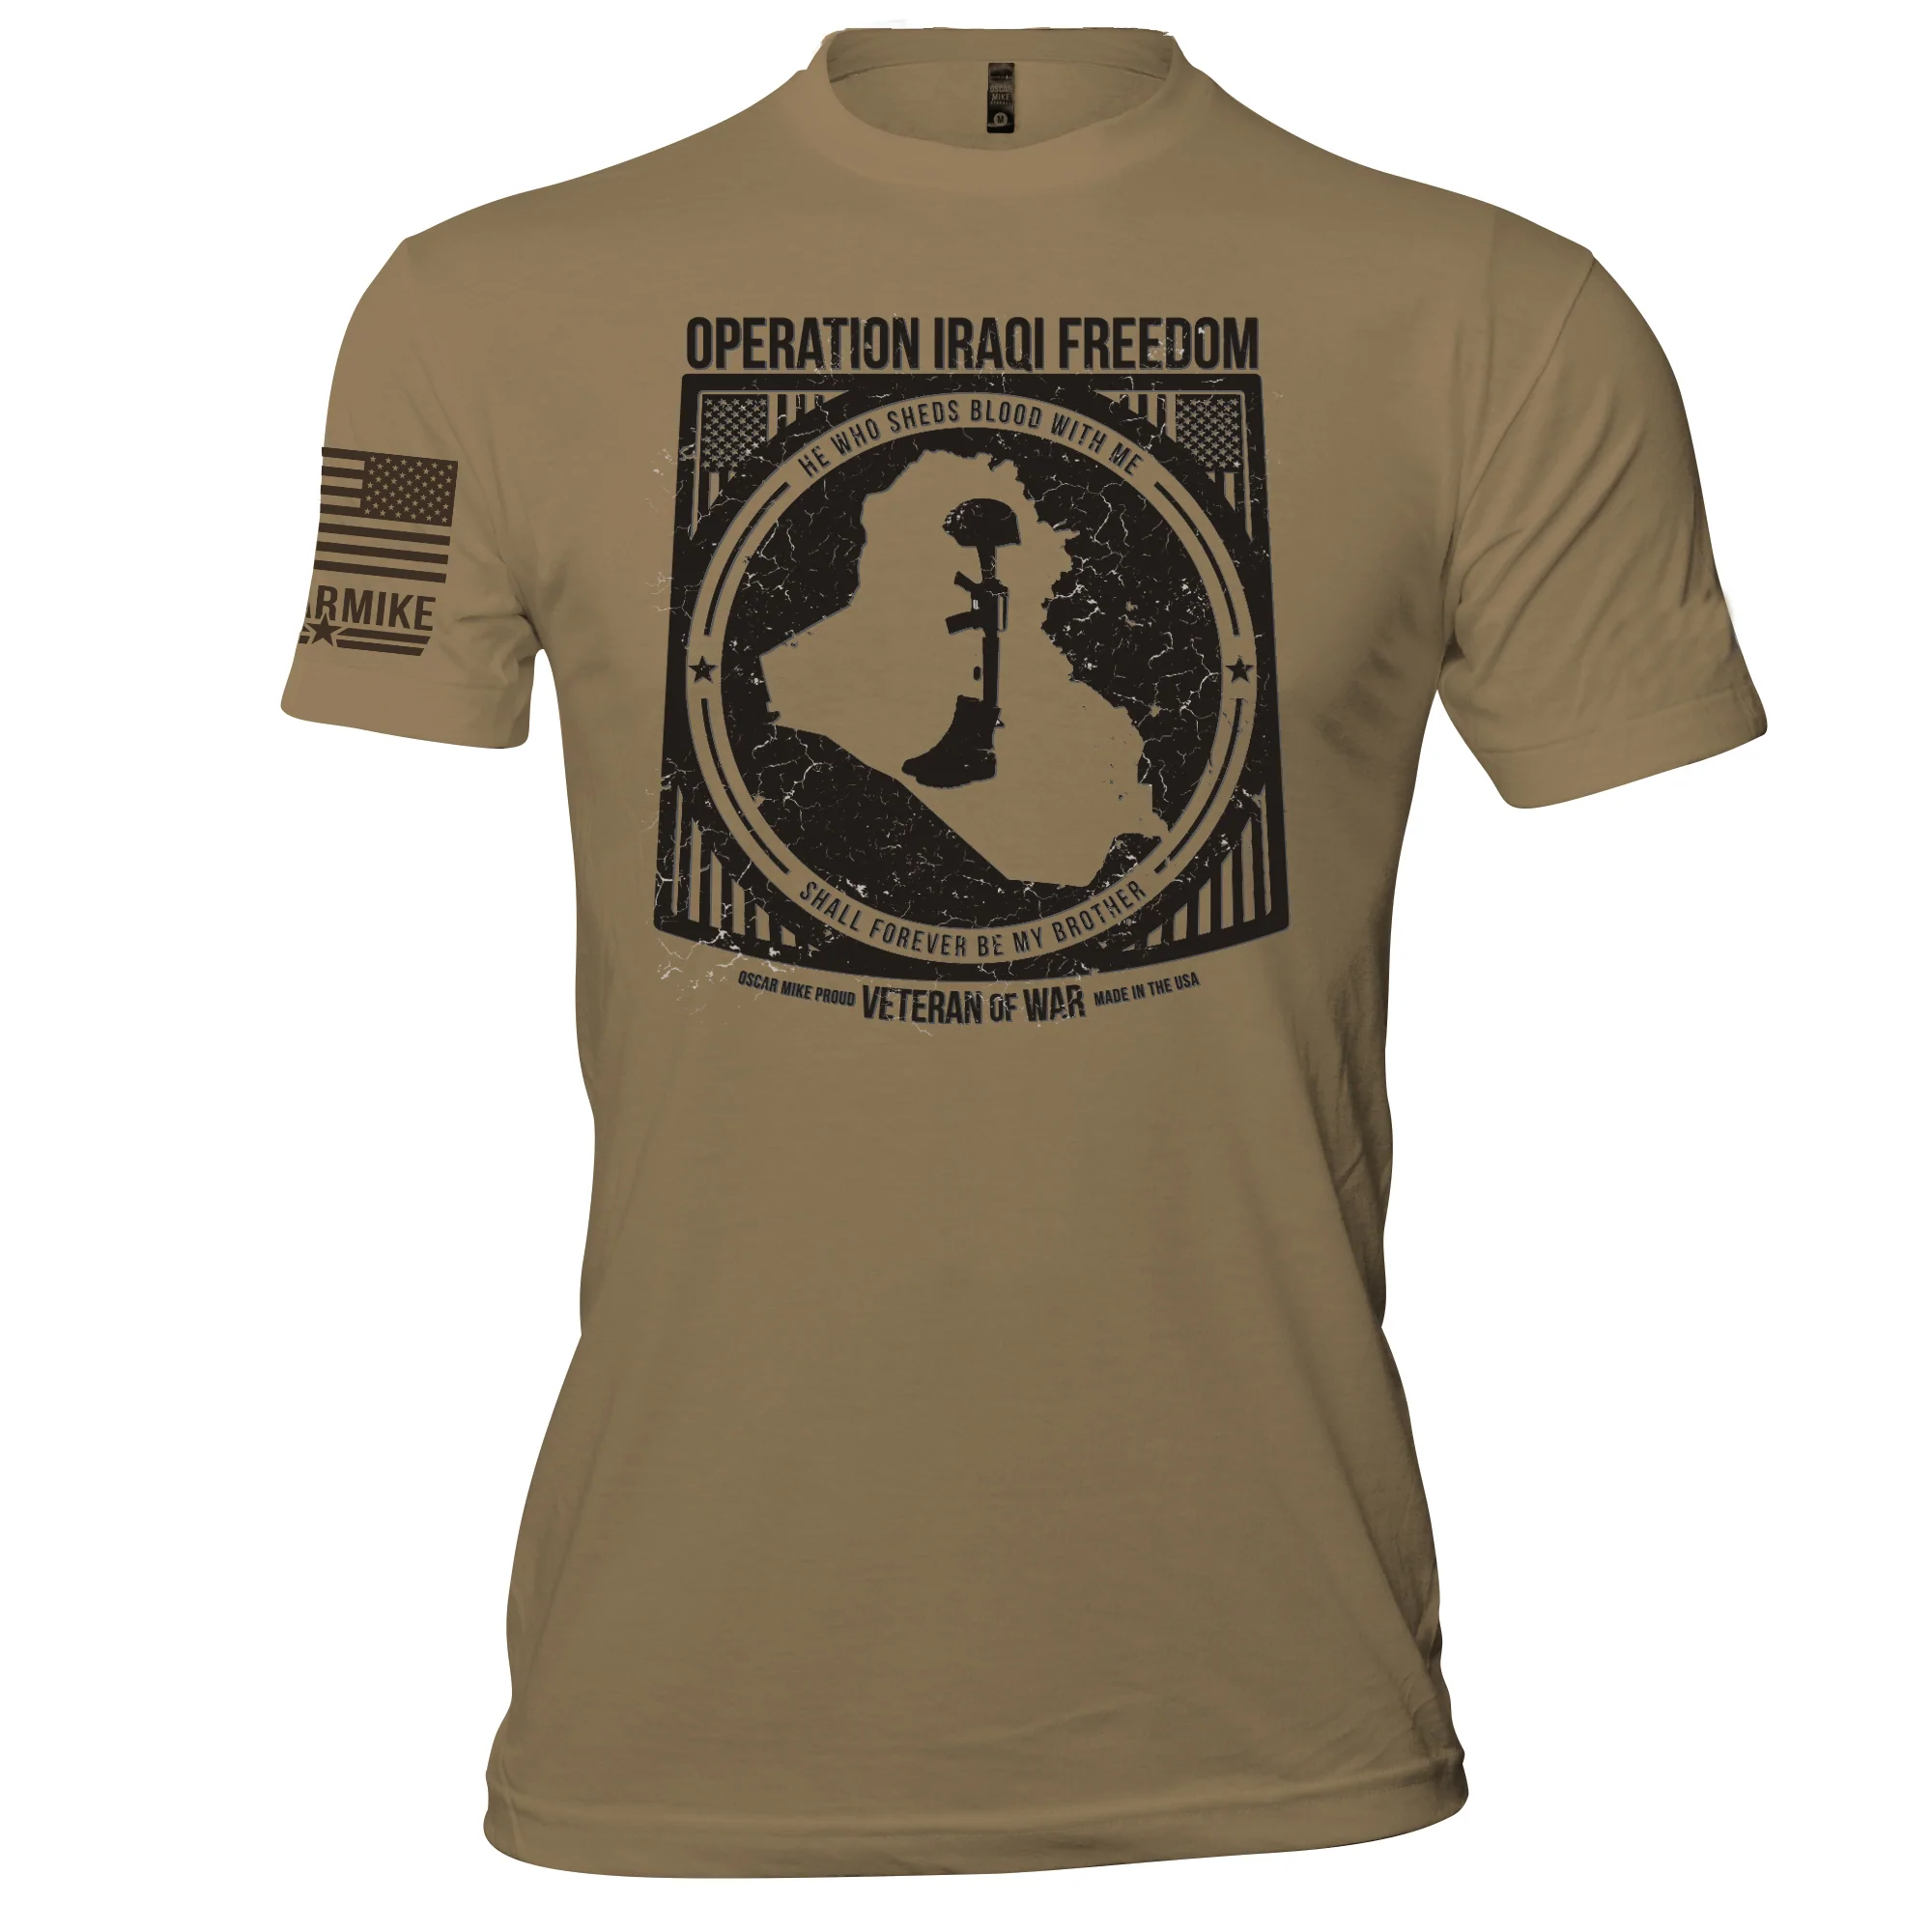 Oscar Mike Men's Operation Iraqi Freedom Tee posted by ProdOrigin USA in Men's Apparel